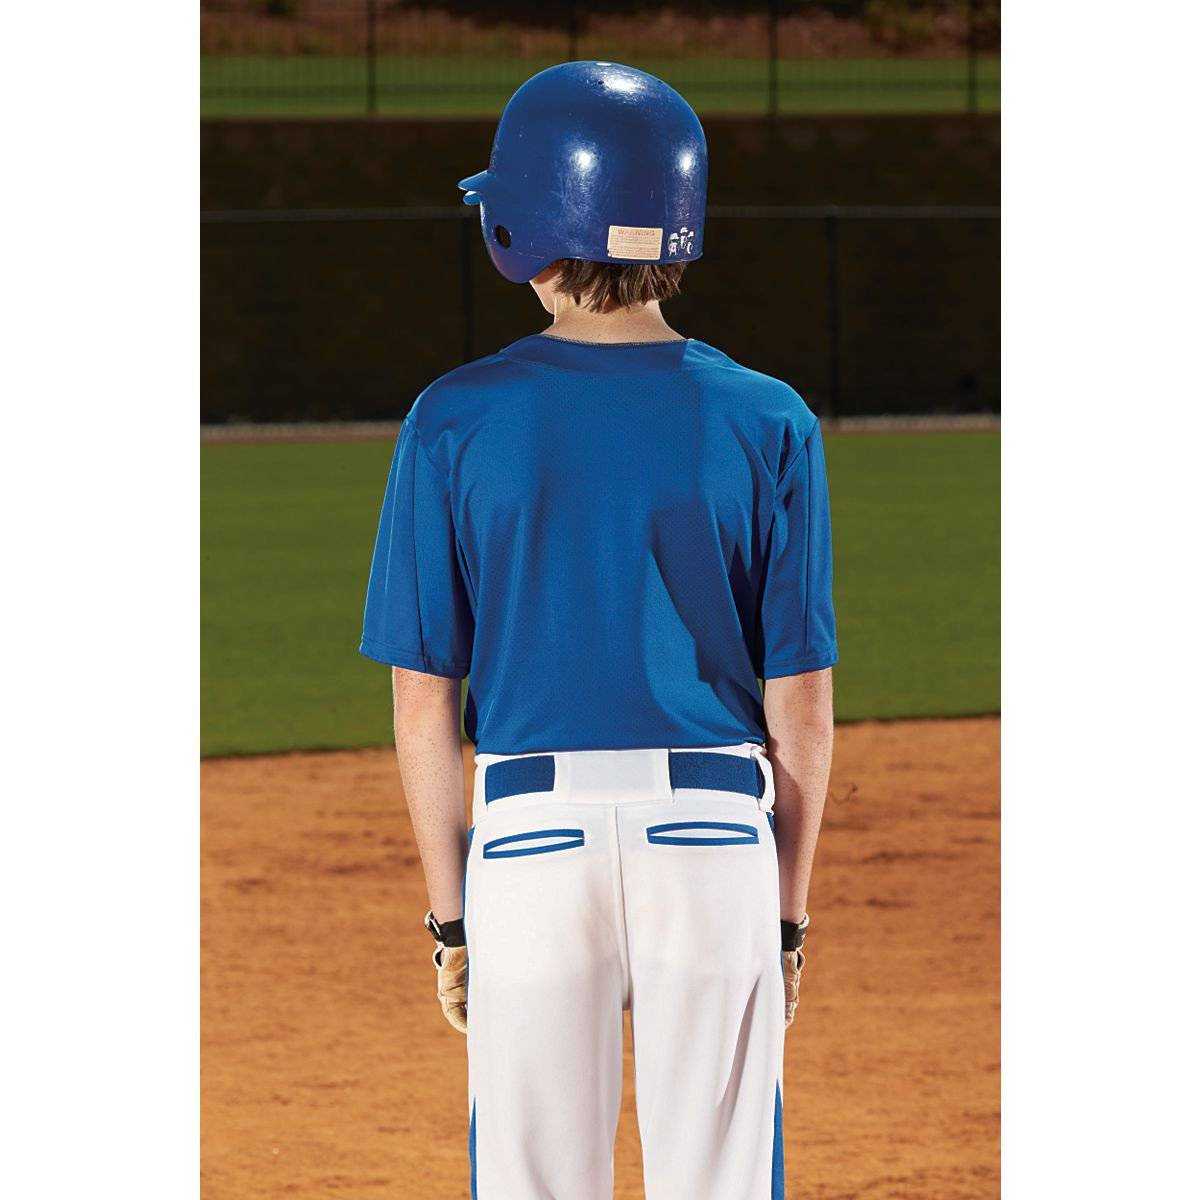 Augusta 1546 Flyball Jersey - Youth - Royal Graphite Black Print - HIT a Double